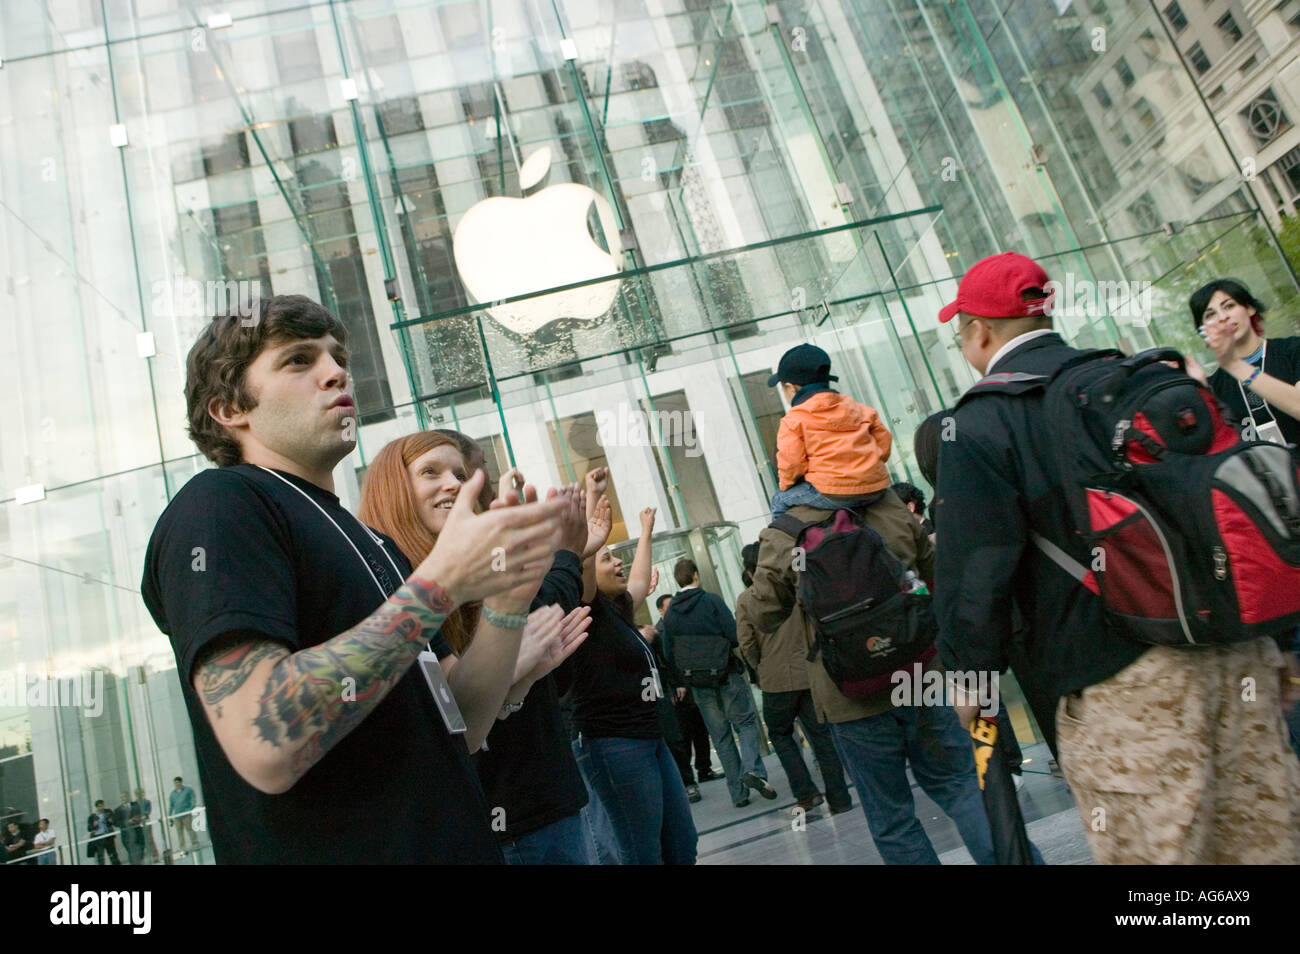 Apple employees cheer to welcome clients entering the Apple store cube on 5th Ave in New York City USA 19 May 2006 Stock Photo